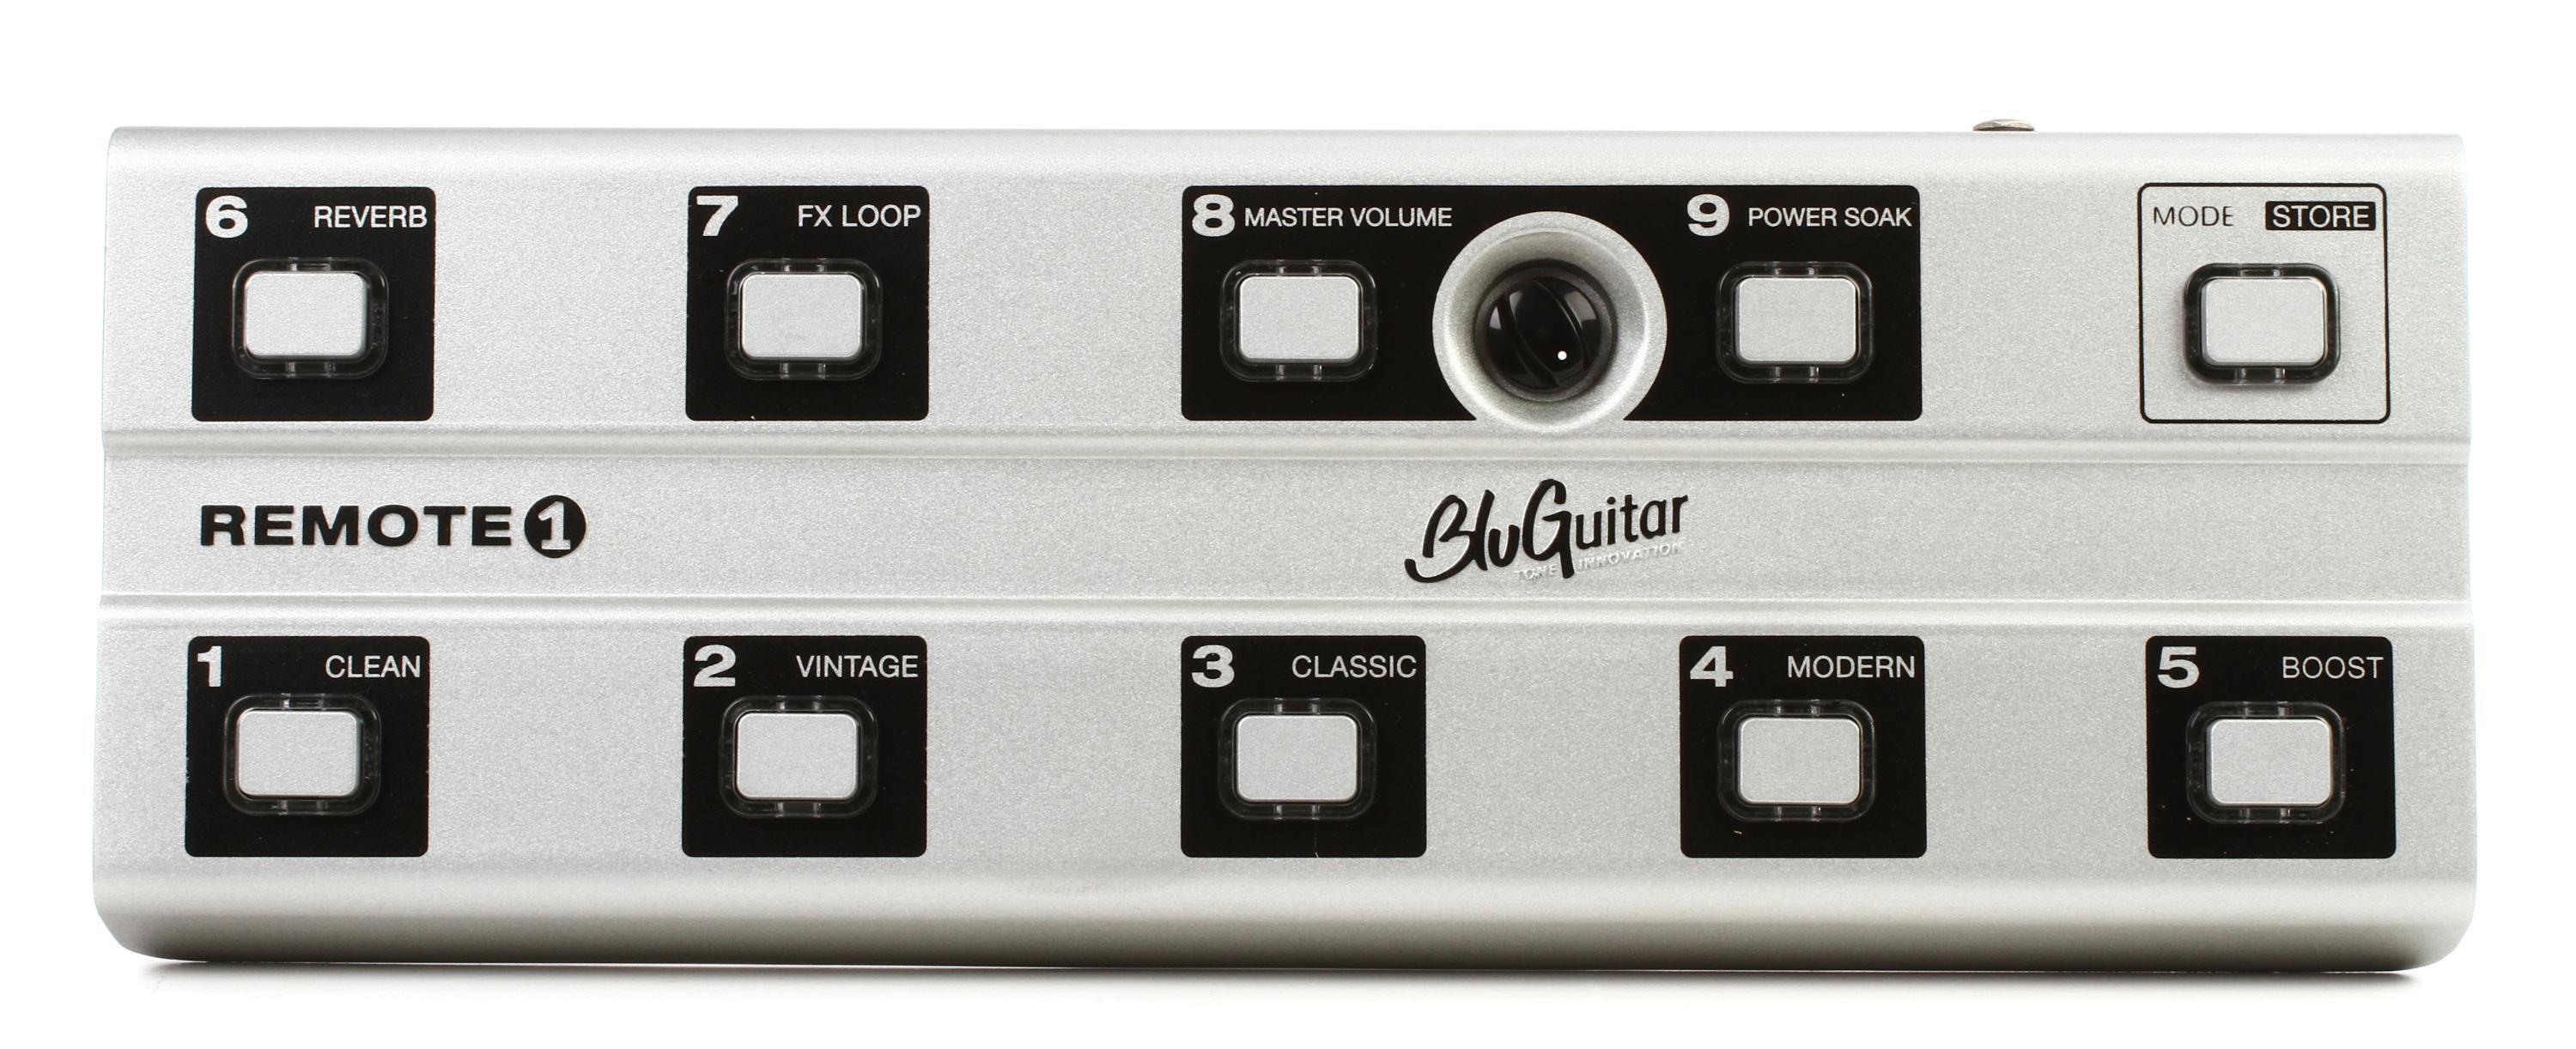 BluGuitar Remote1 Remote Foot Controller for Amp1 | Sweetwater